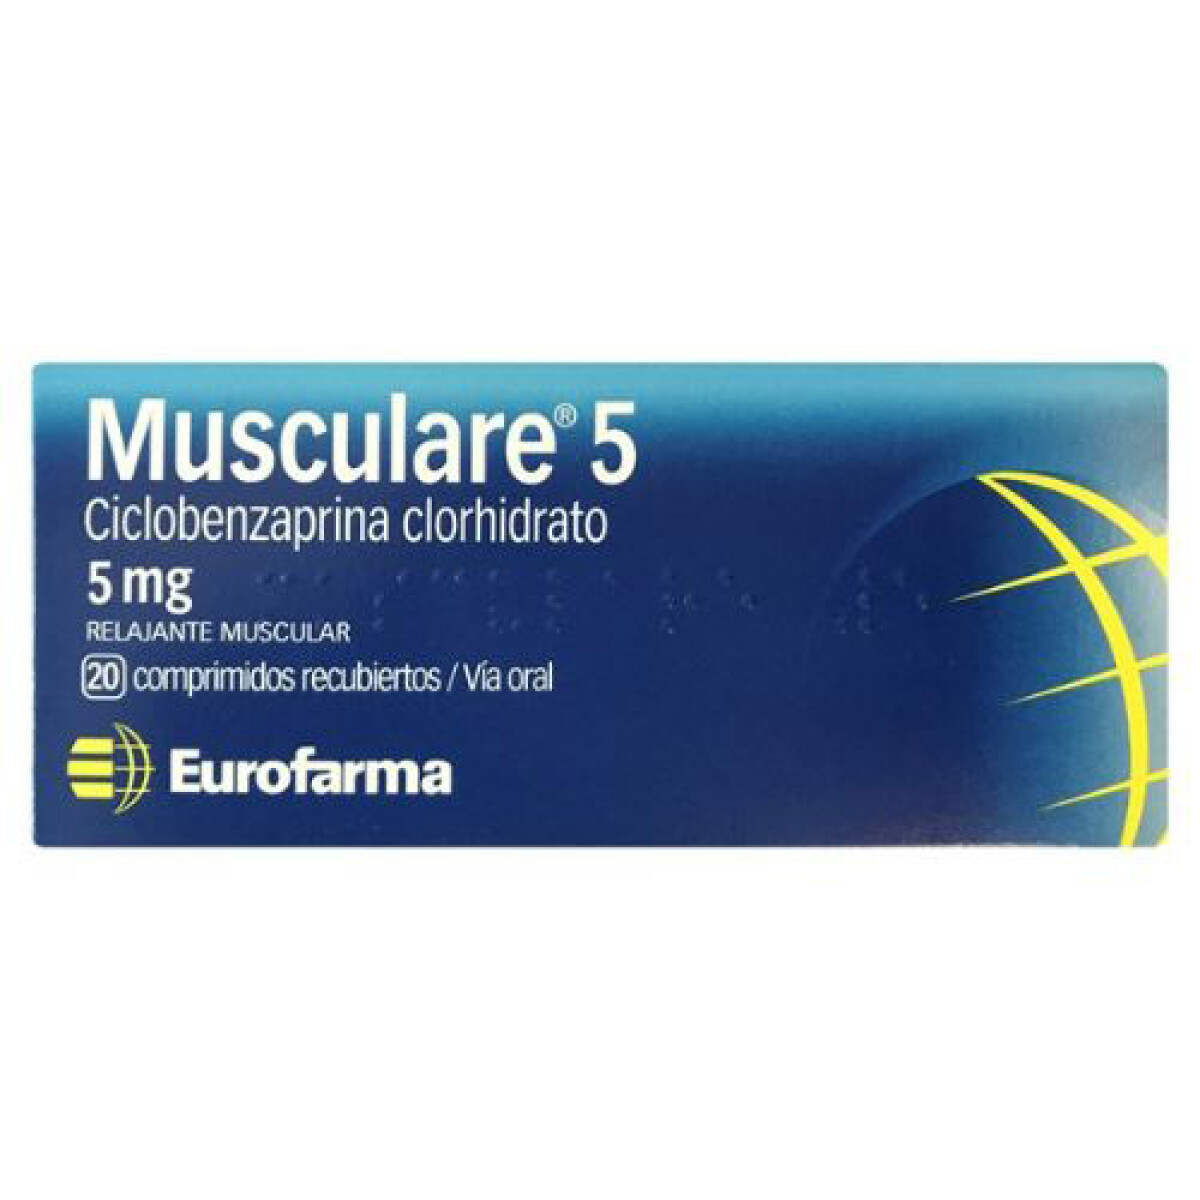 Musculare 5 Mg x 20 COM 